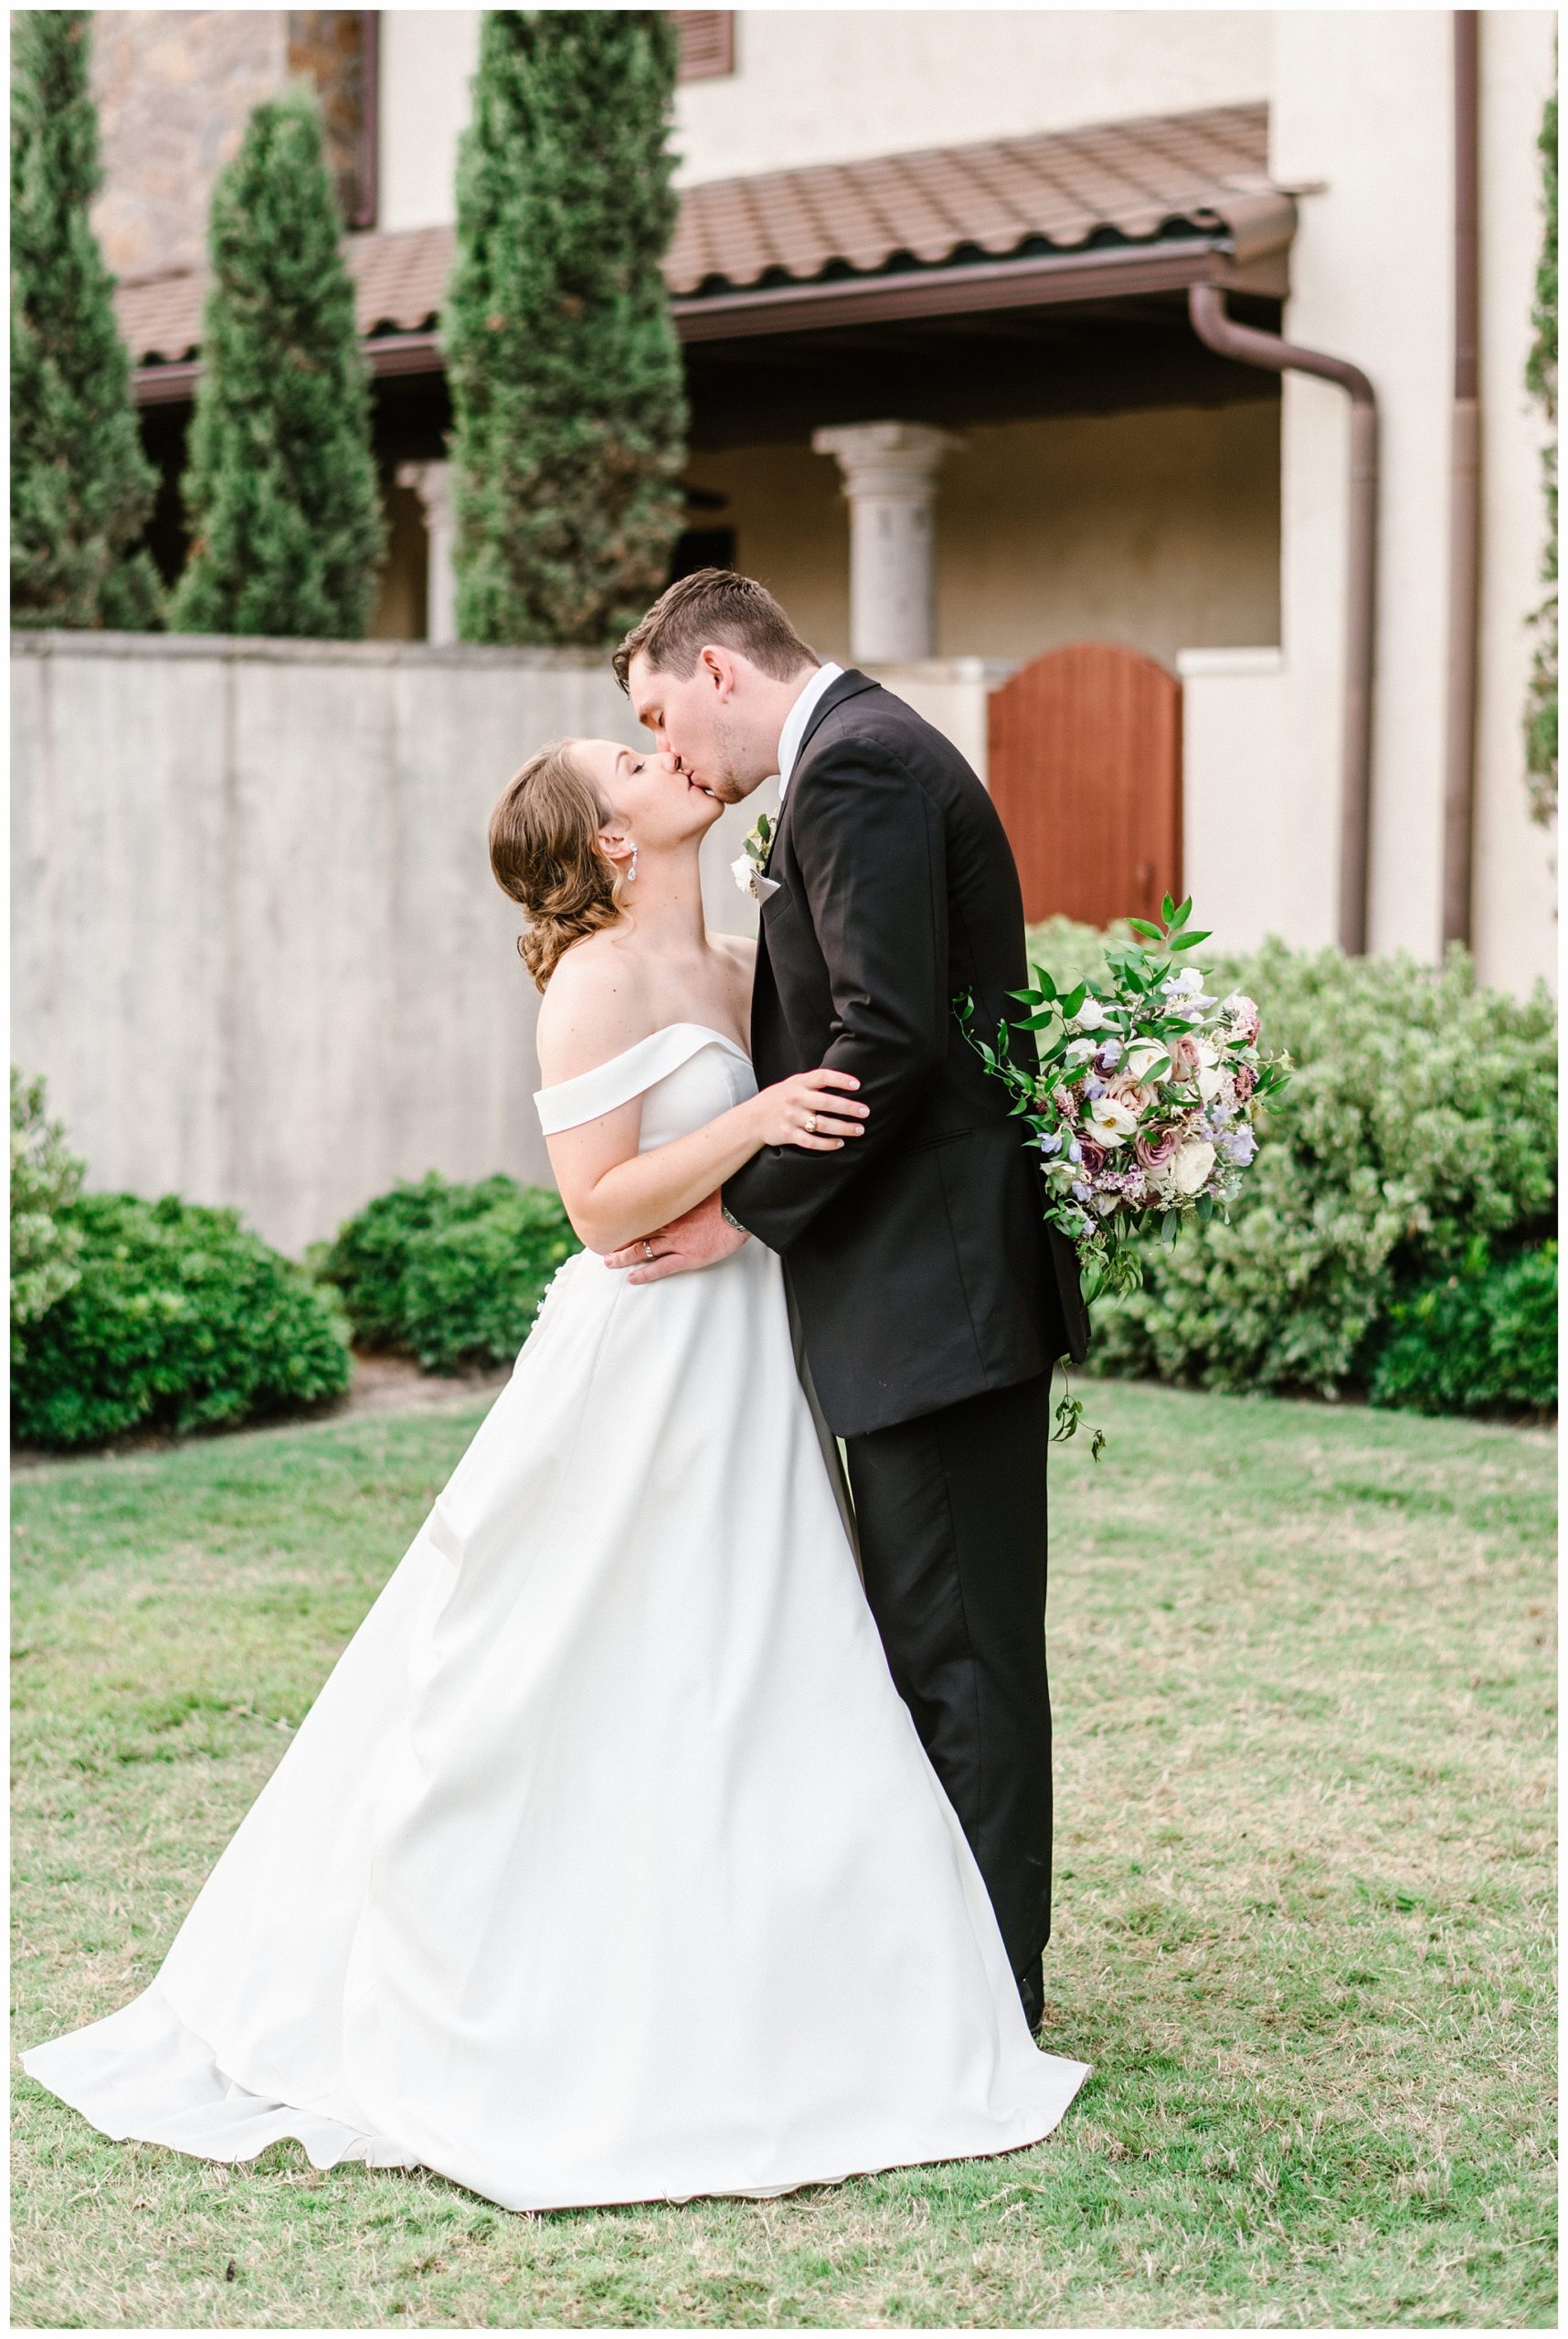 Wedding Portraits at Tuscan Villa with Violet and Plum Bridal Bouquet